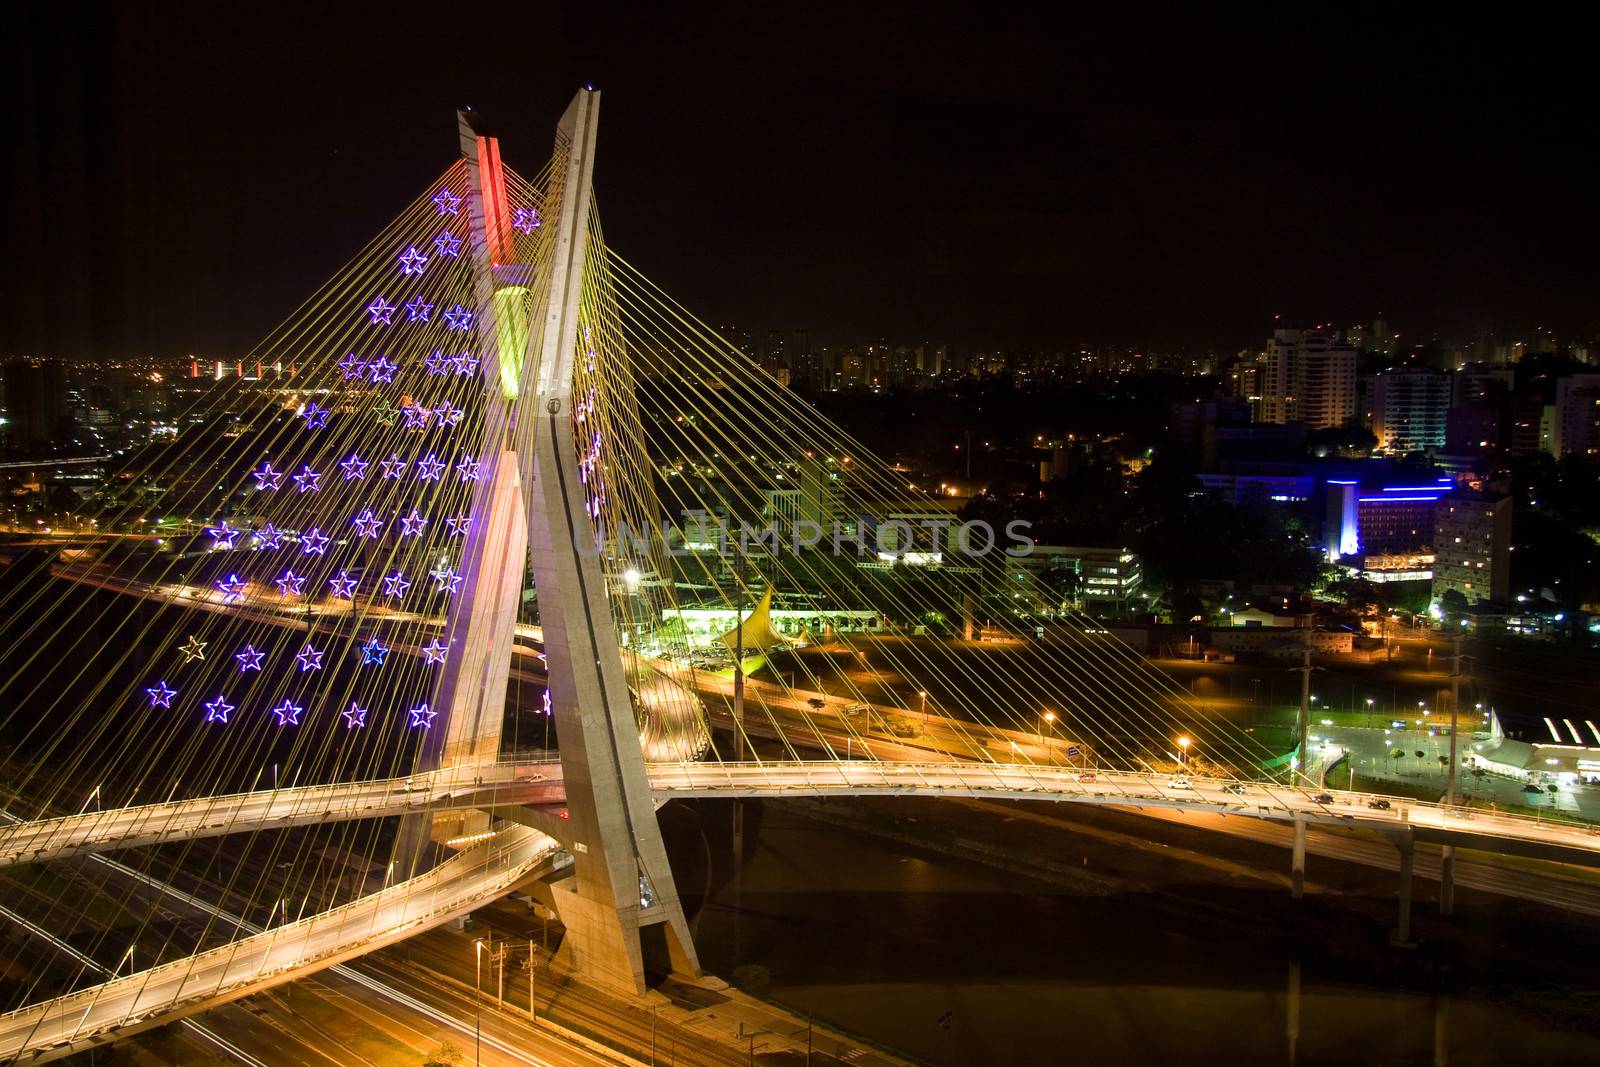 Awesome bridge lit up at night by CelsoDiniz